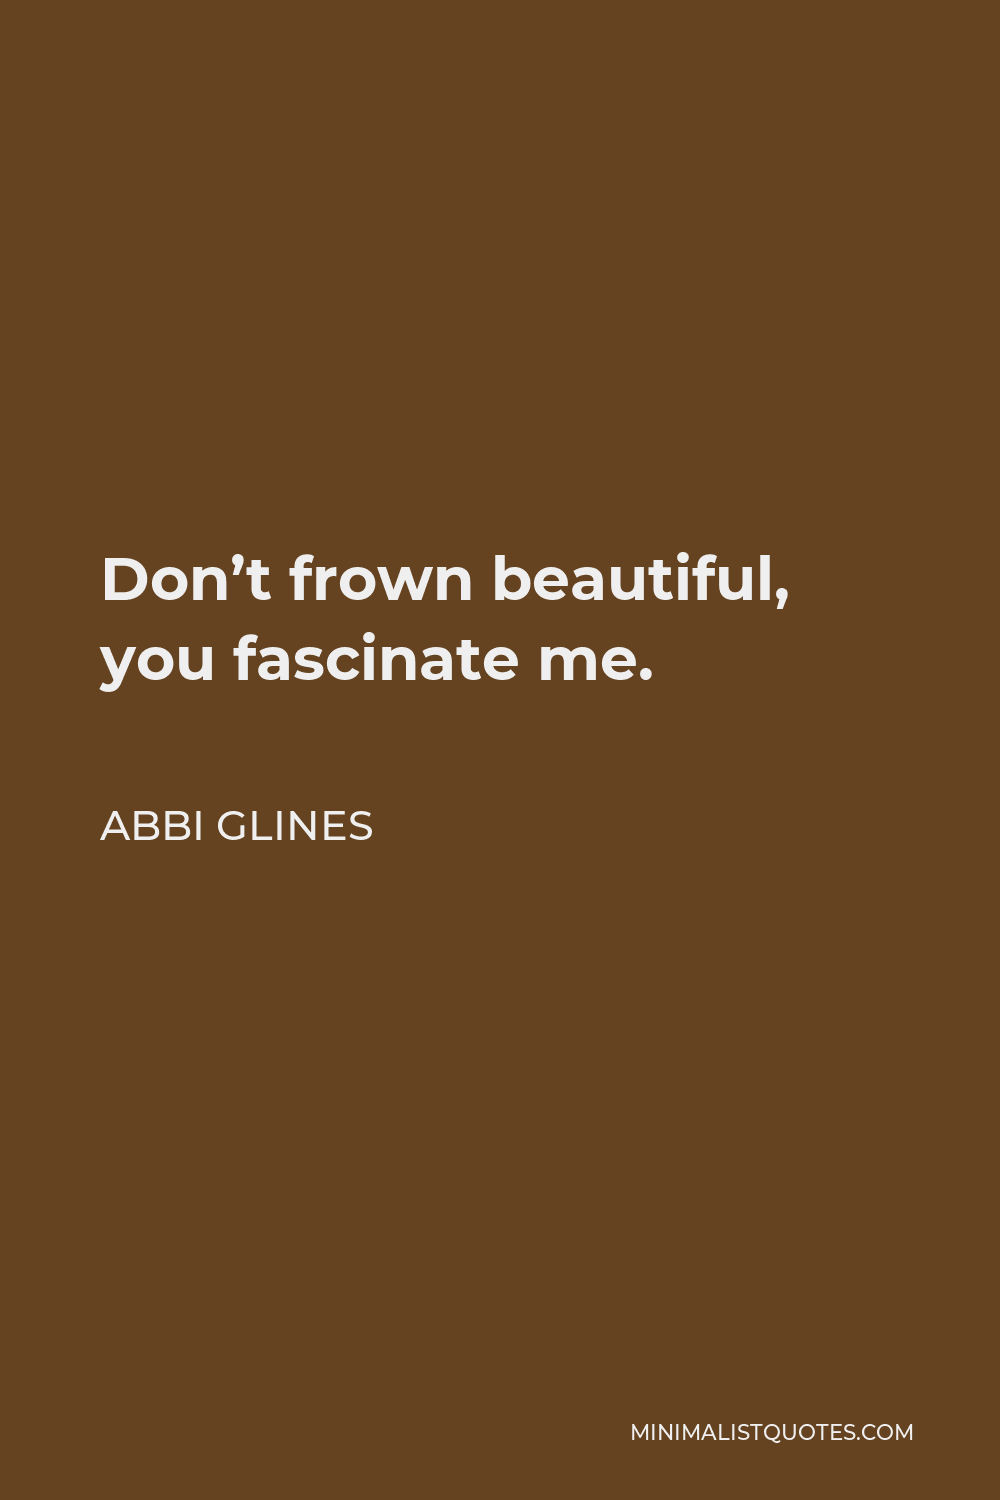 Abbi Glines Quote - Don’t frown beautiful, you fascinate me.